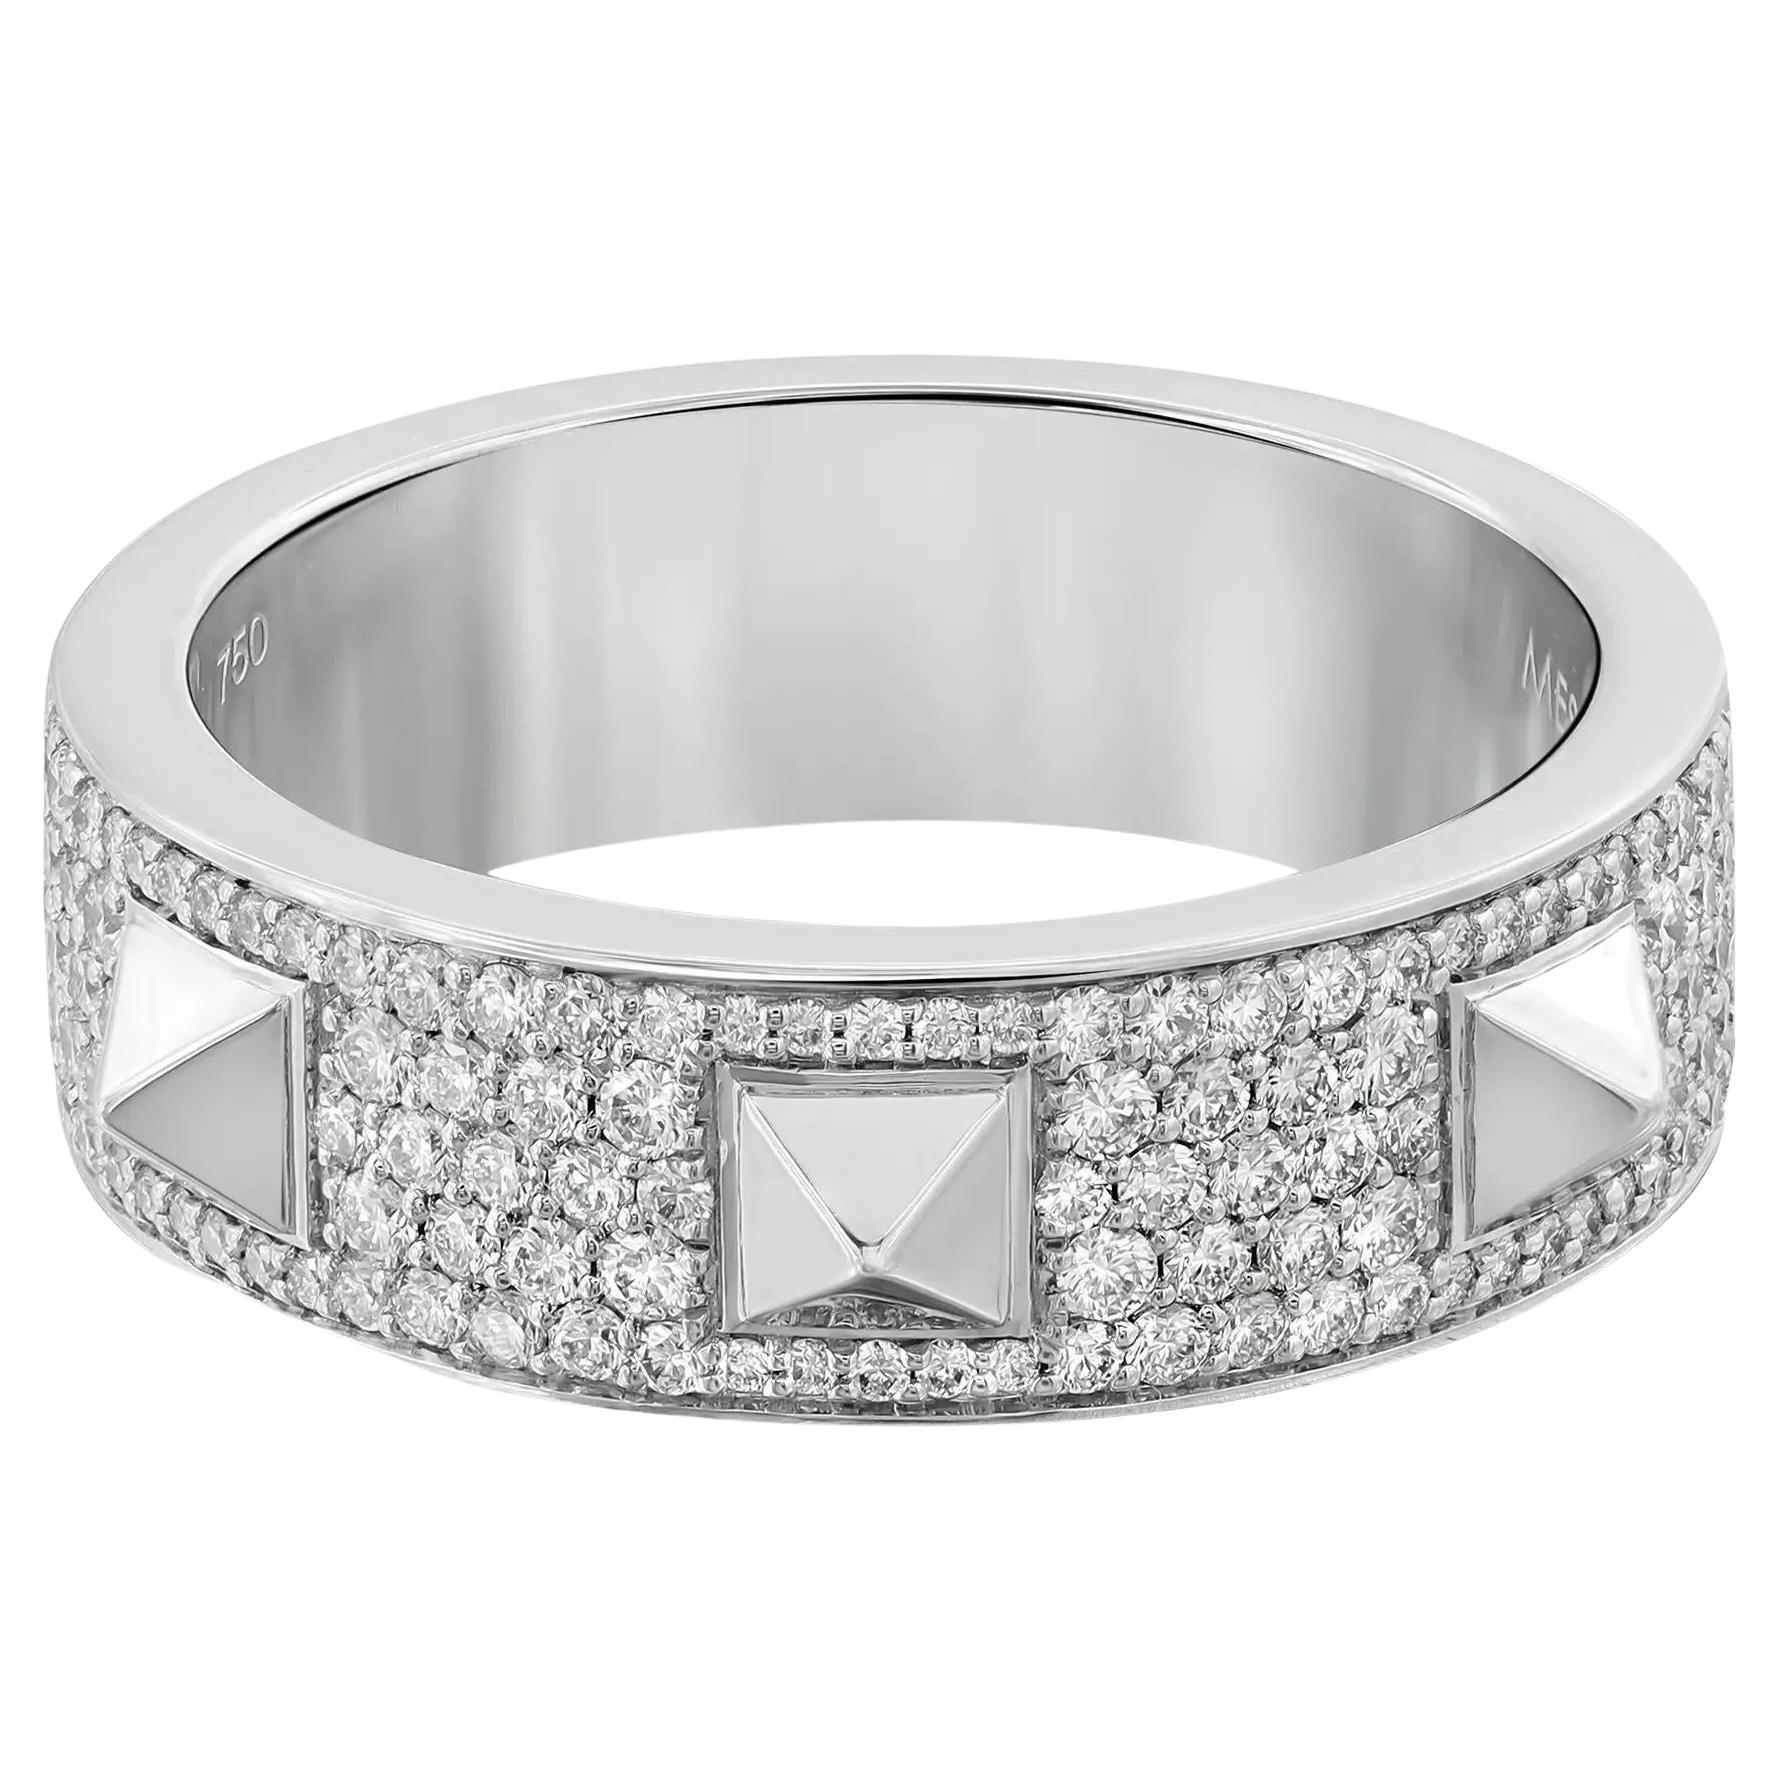 Messika 0.61Cttw Spiky Diamond Band Ring 18K White Gold Size 53 US 6.5 For Sale